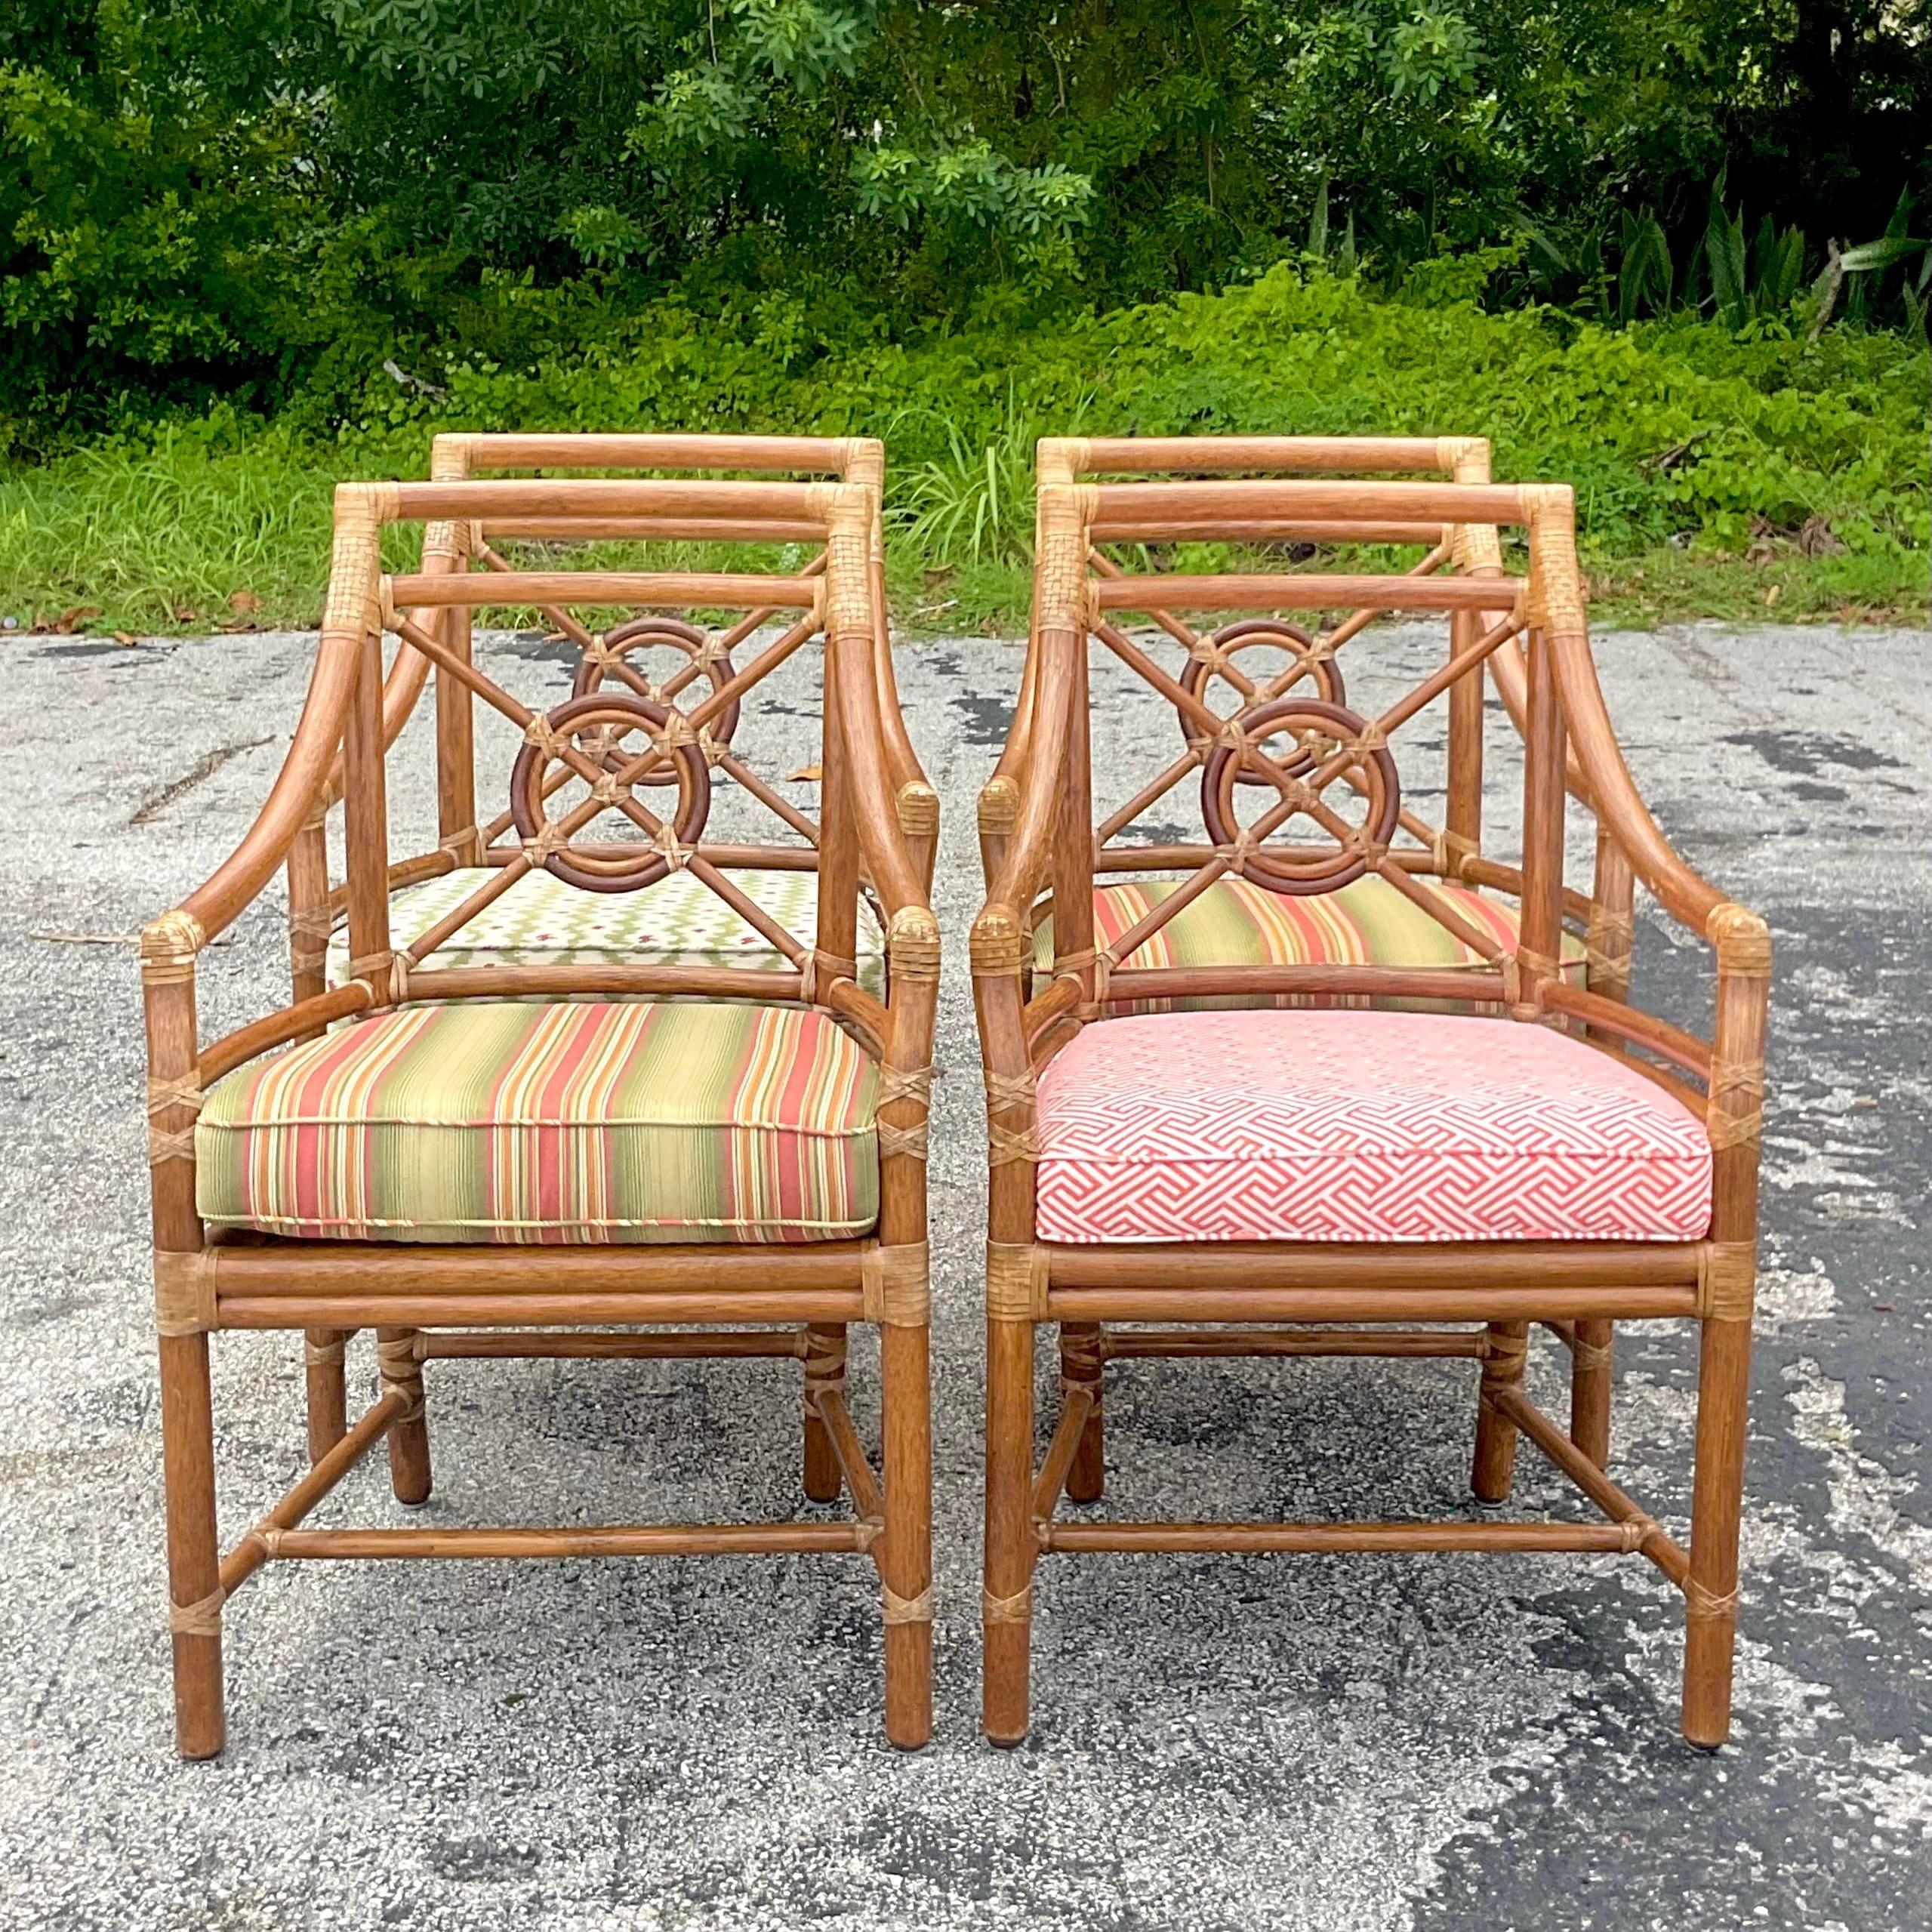 Vintage Coastal Rattan dining chairs. Made by the iconic McGuire group and tagged on the bottom. The coveted Target back design. Chic loose cushions in four different, but coordinating upholstery. Acquired from a Palm Beach estate